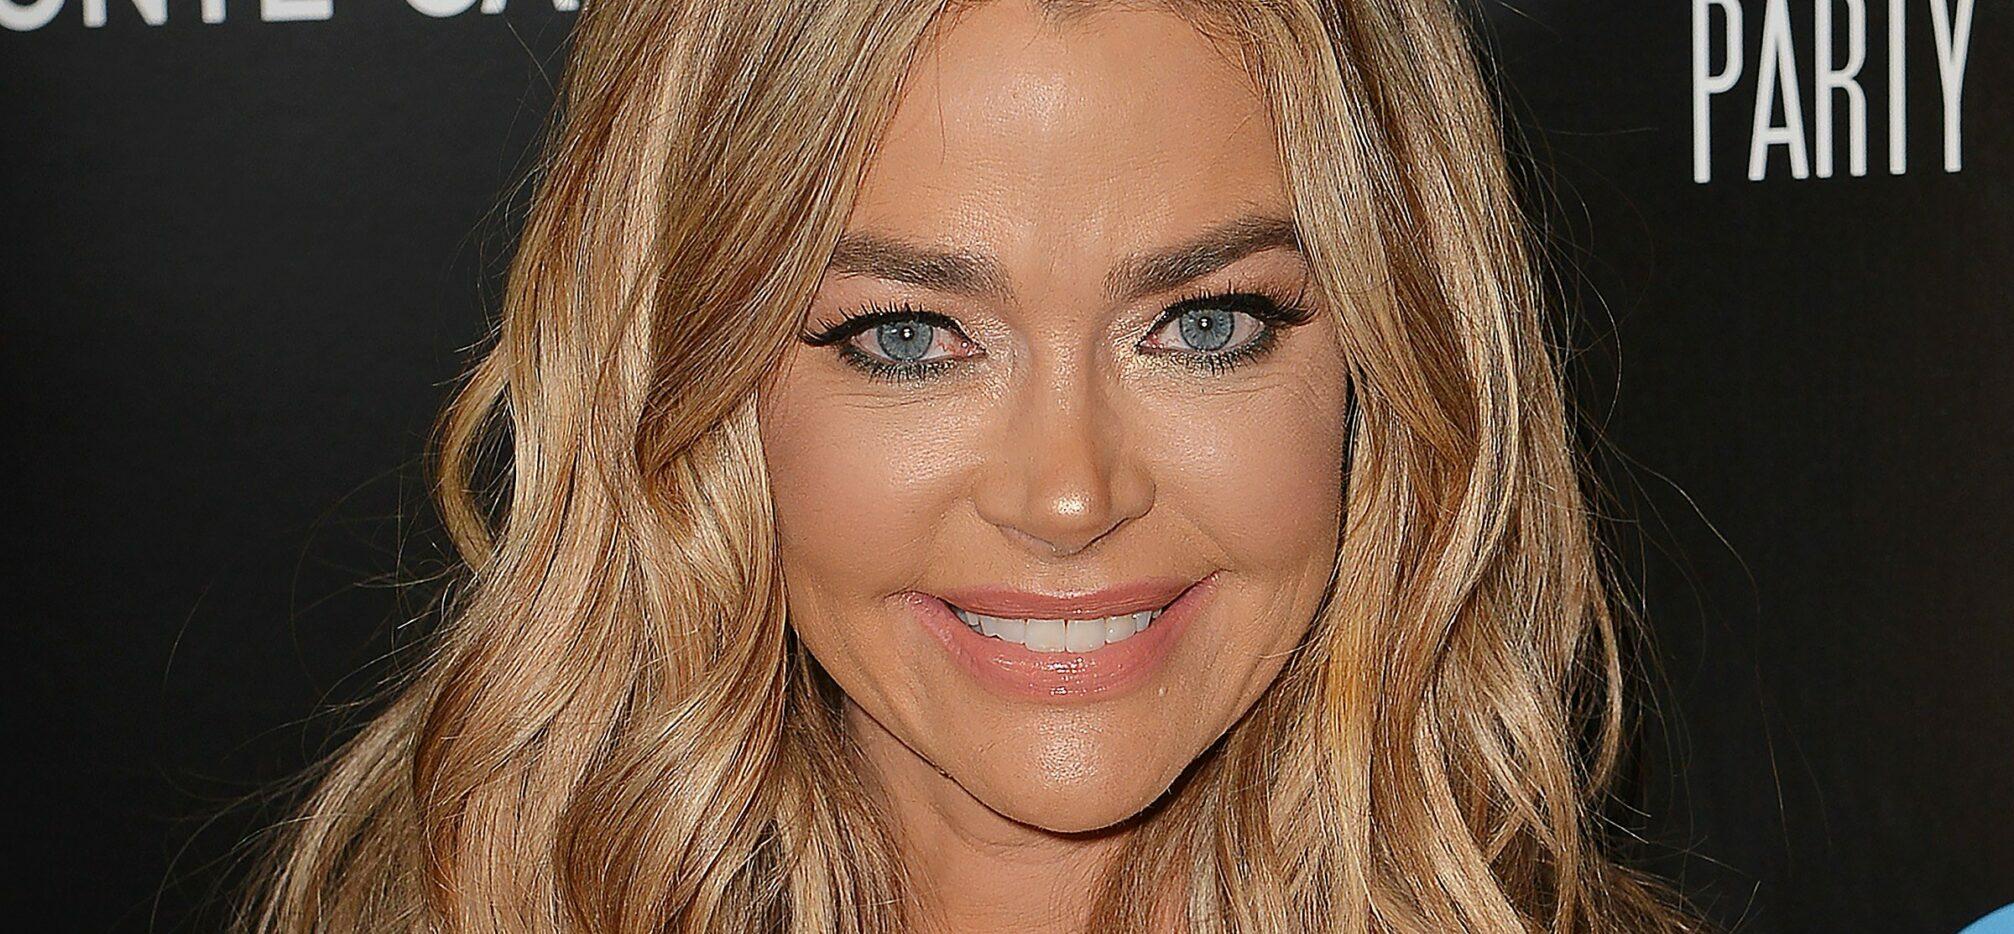 Denise Richards Hits The Beach In Cannes In A High-Slit Dress